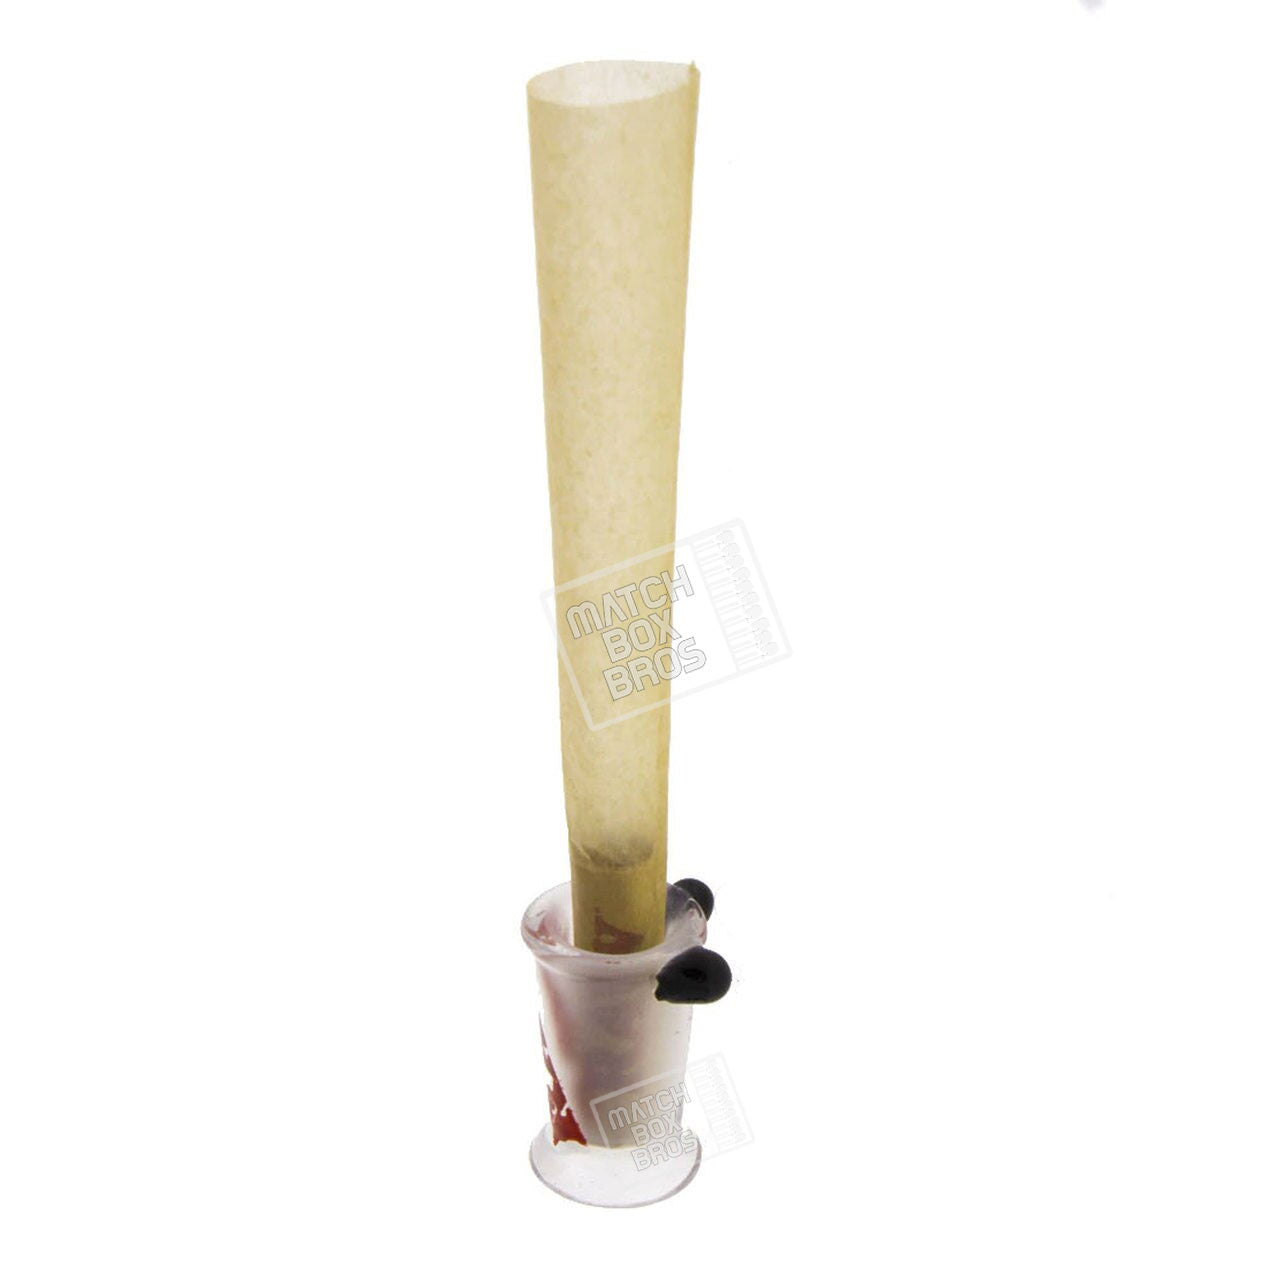 RAW Cone Bro Glass Tip with Pre-Rolled Cone